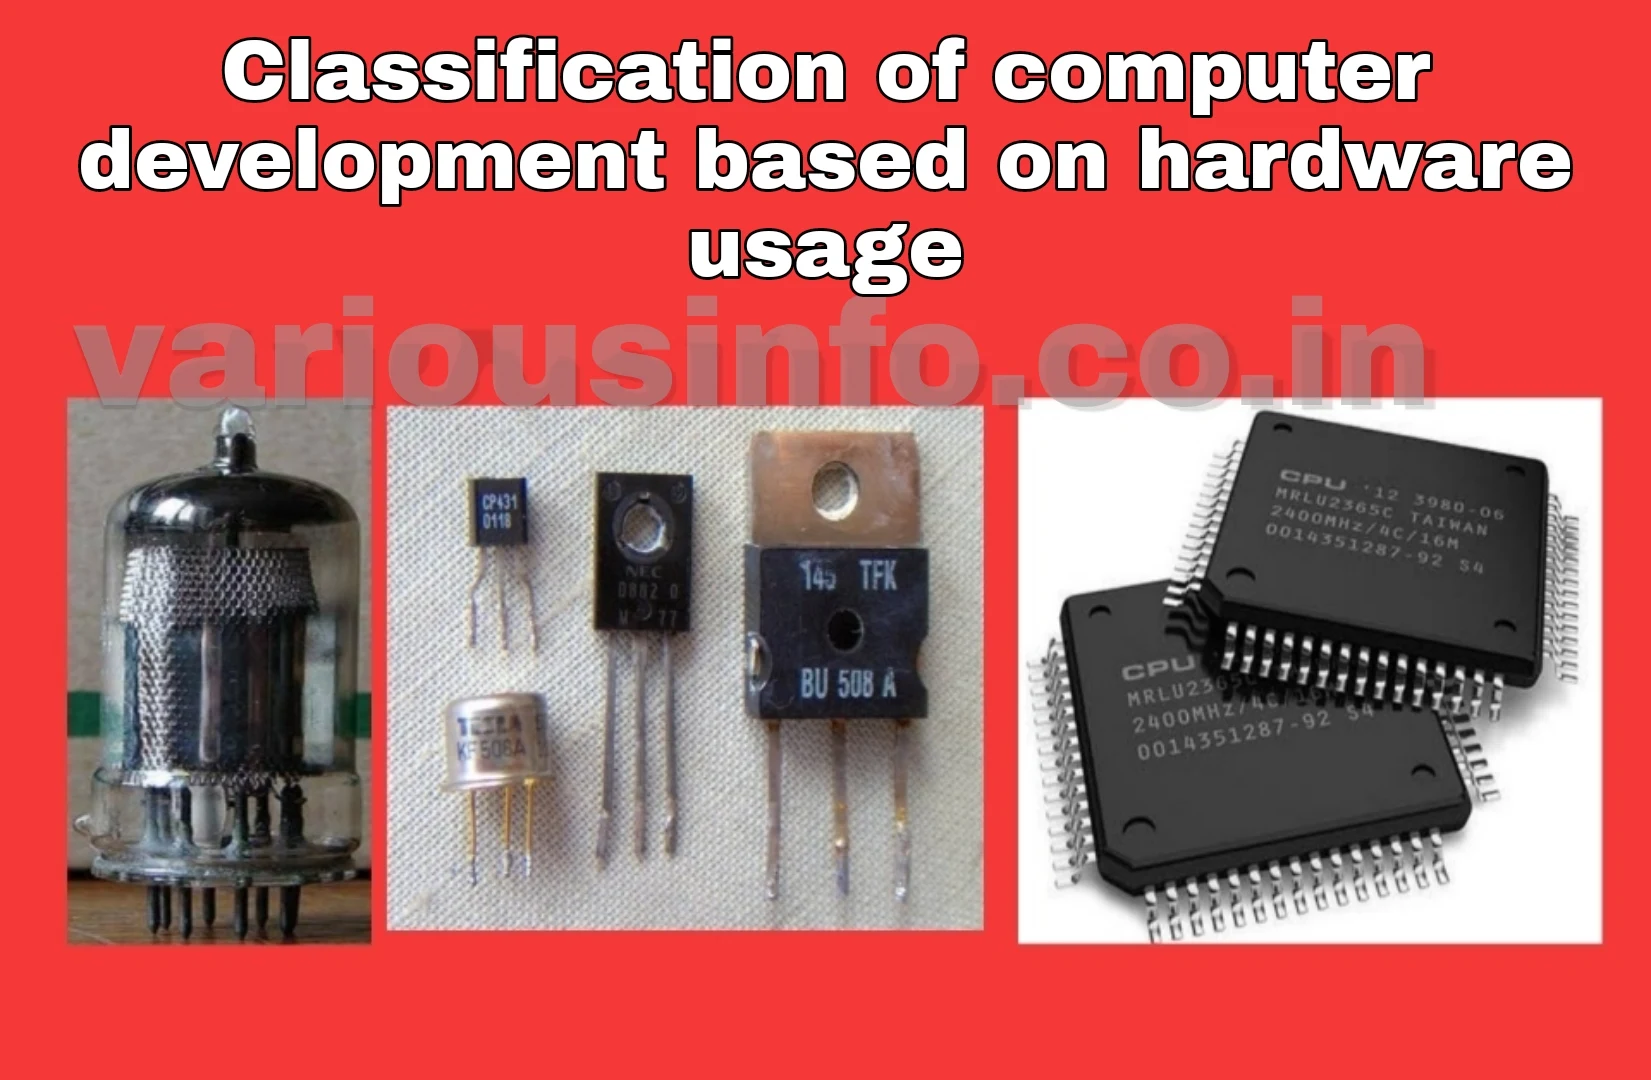 Classification of computer development based on hardware usage